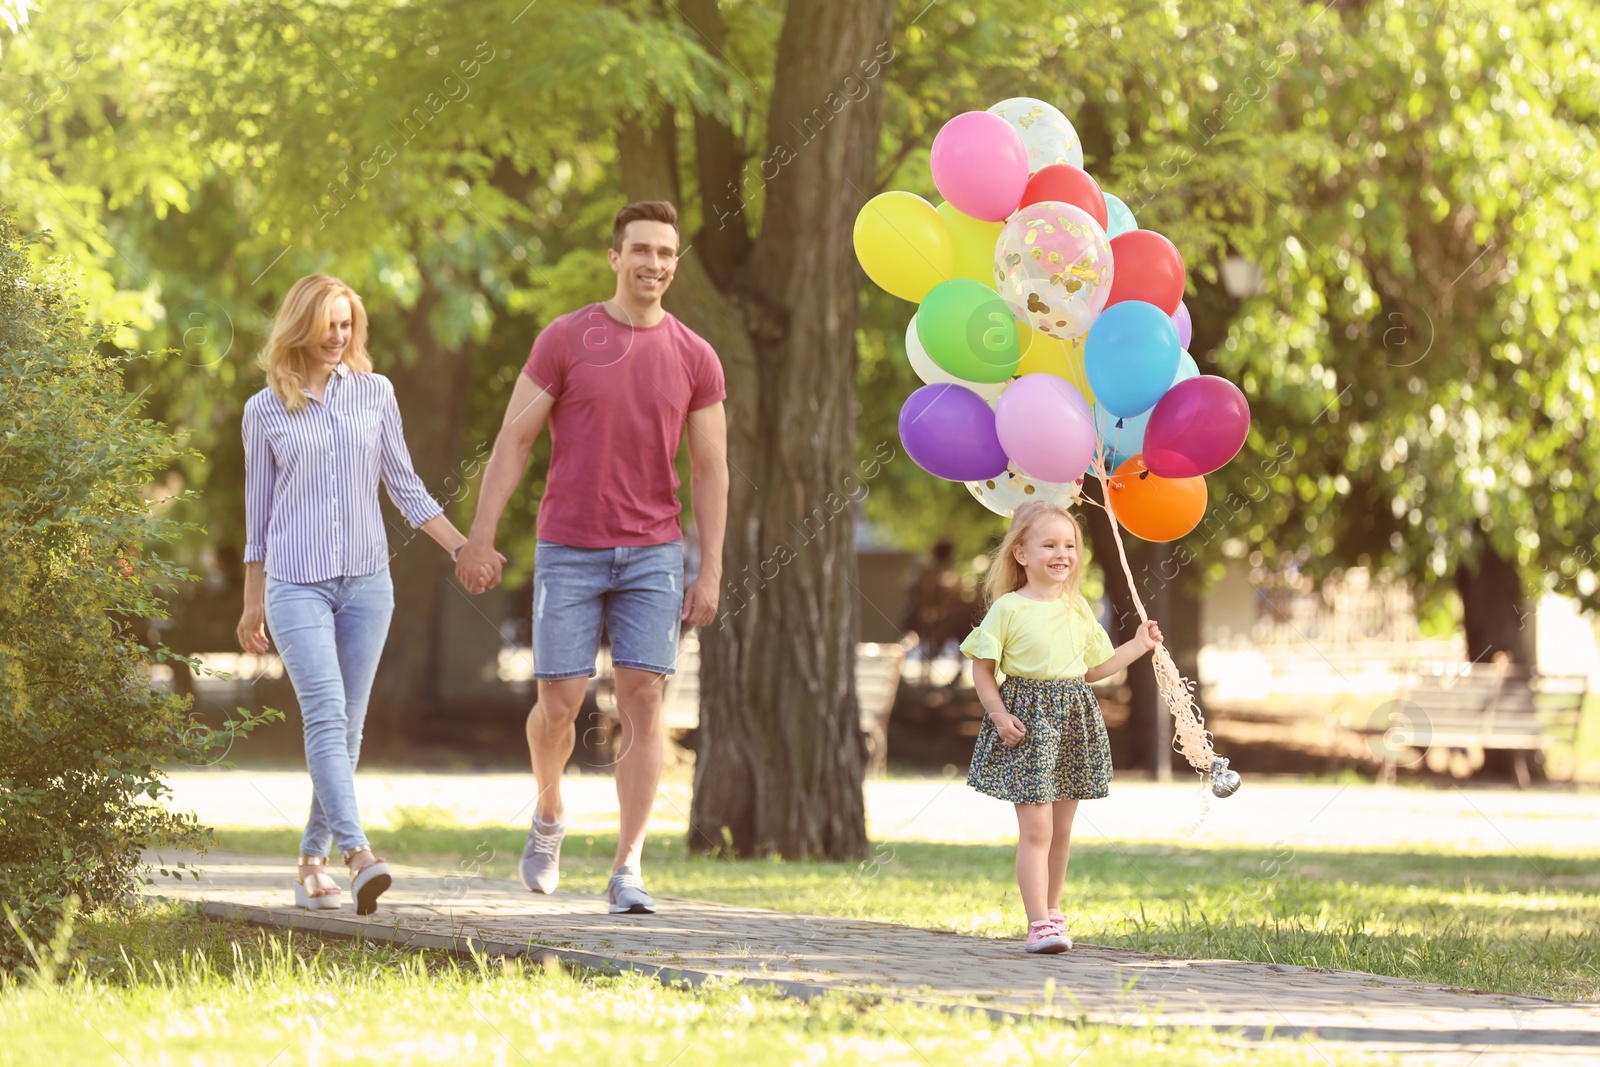 Photo of Happy family with colorful balloons in park on sunny day